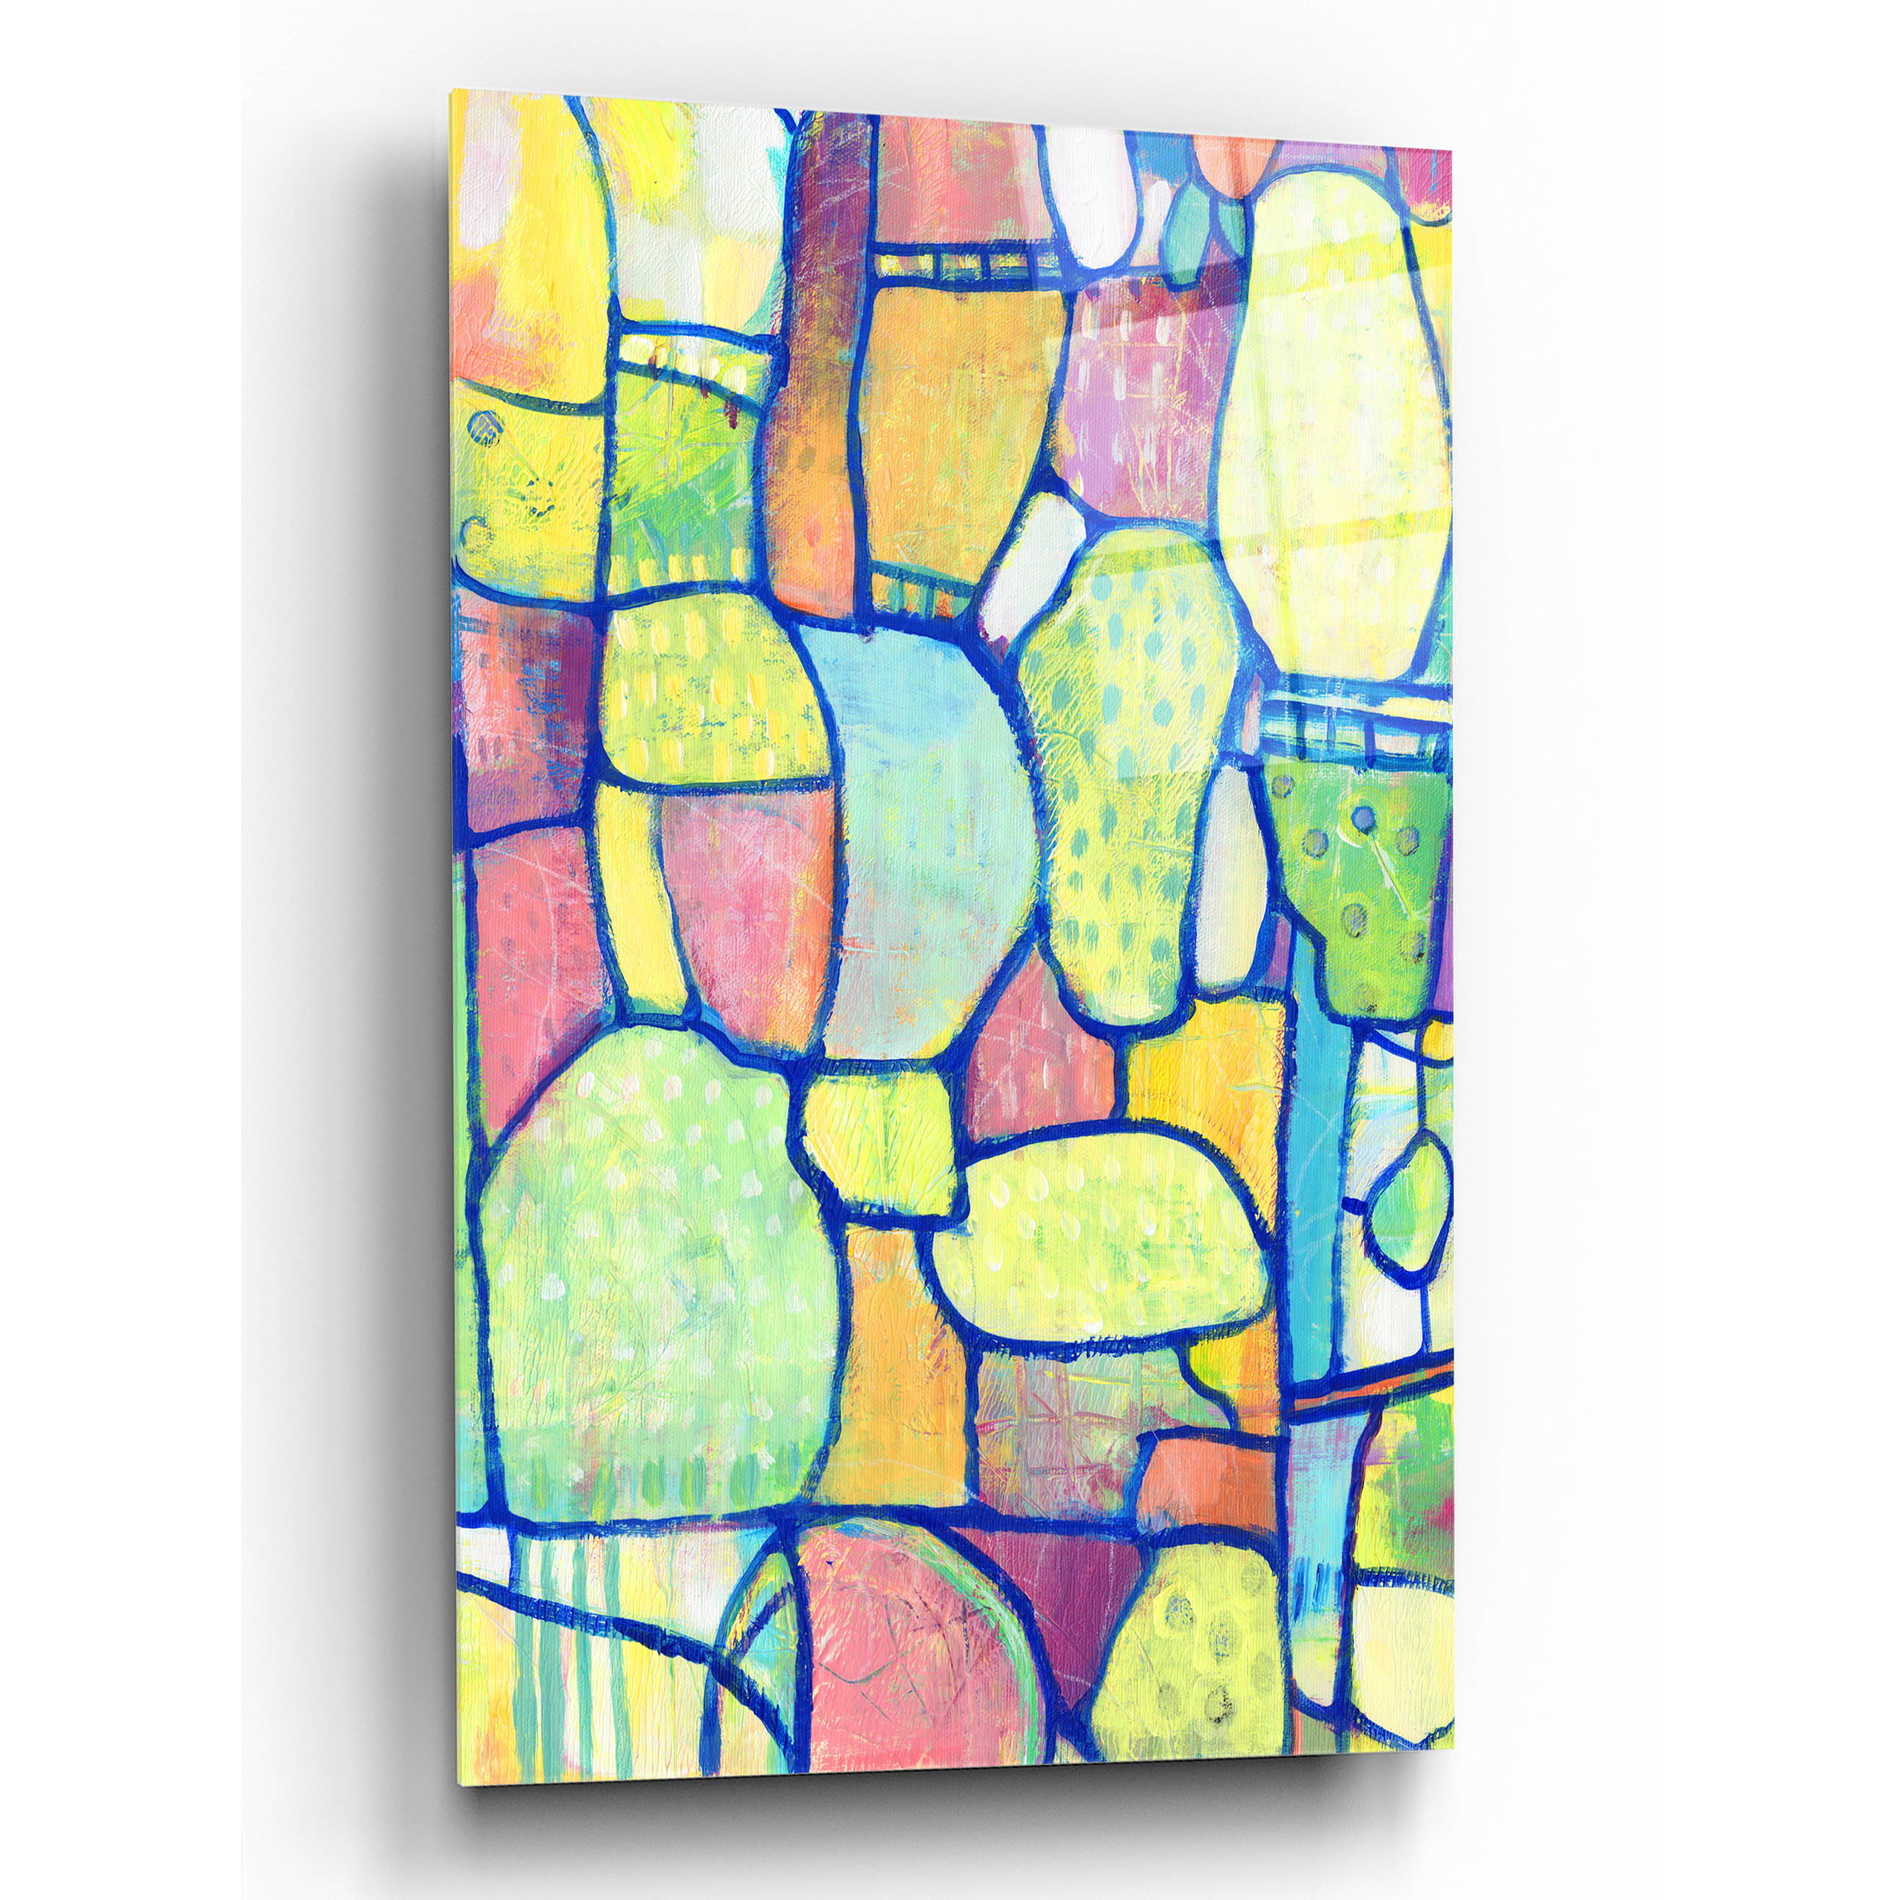 Epic Art 'Stained Glass Composition II' by Tim O'Toole, Acrylic Glass Wall Art,16x24